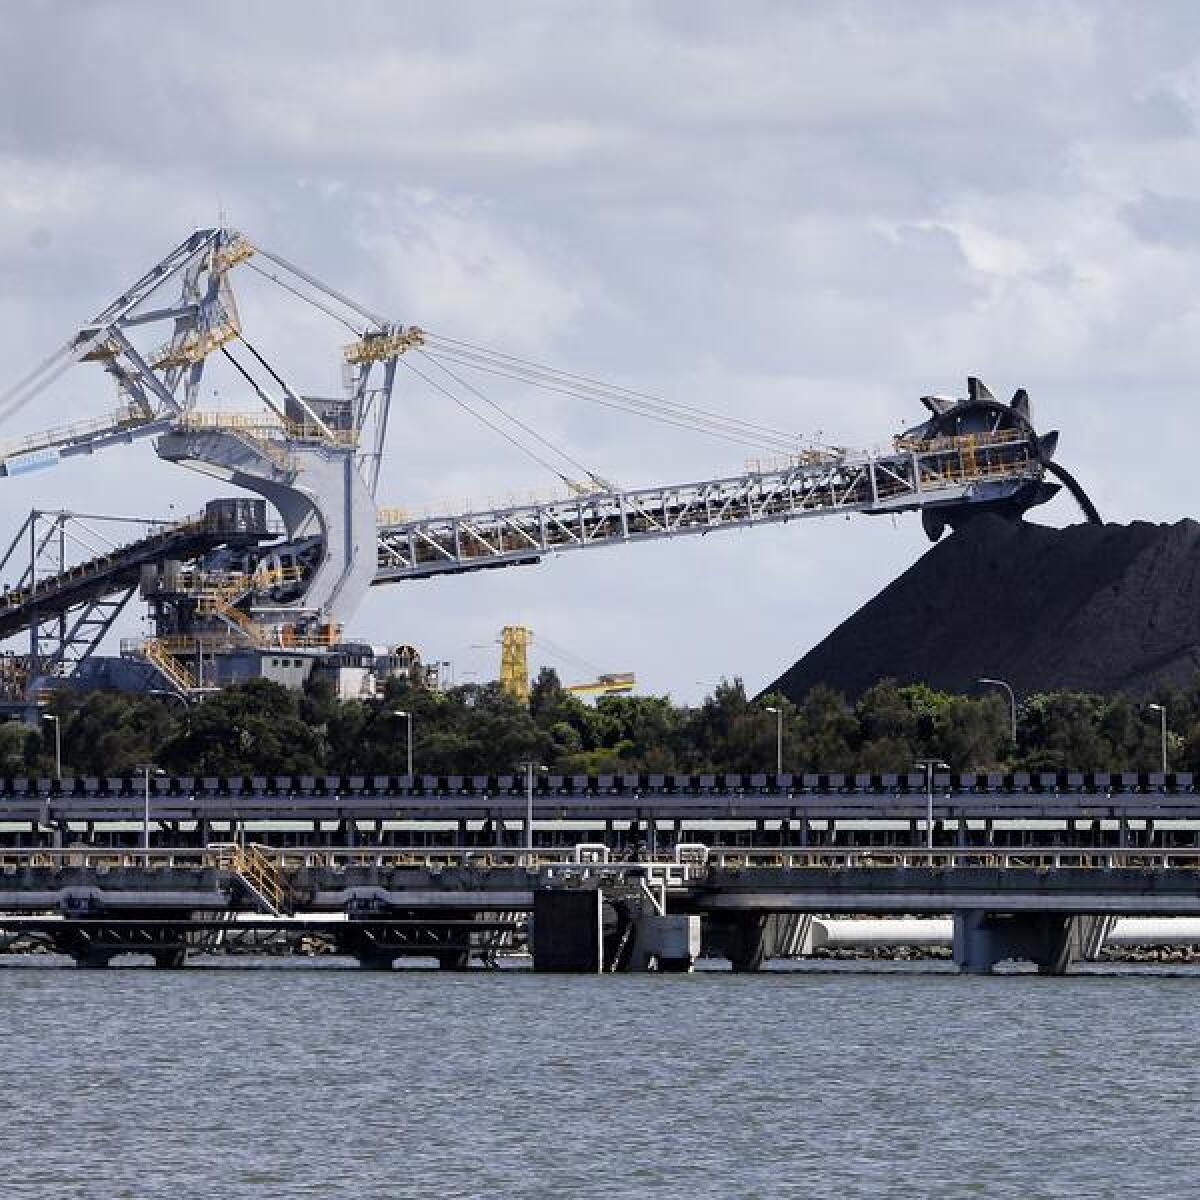 The Kooragang Coal Loader in the Port of Newcastle.